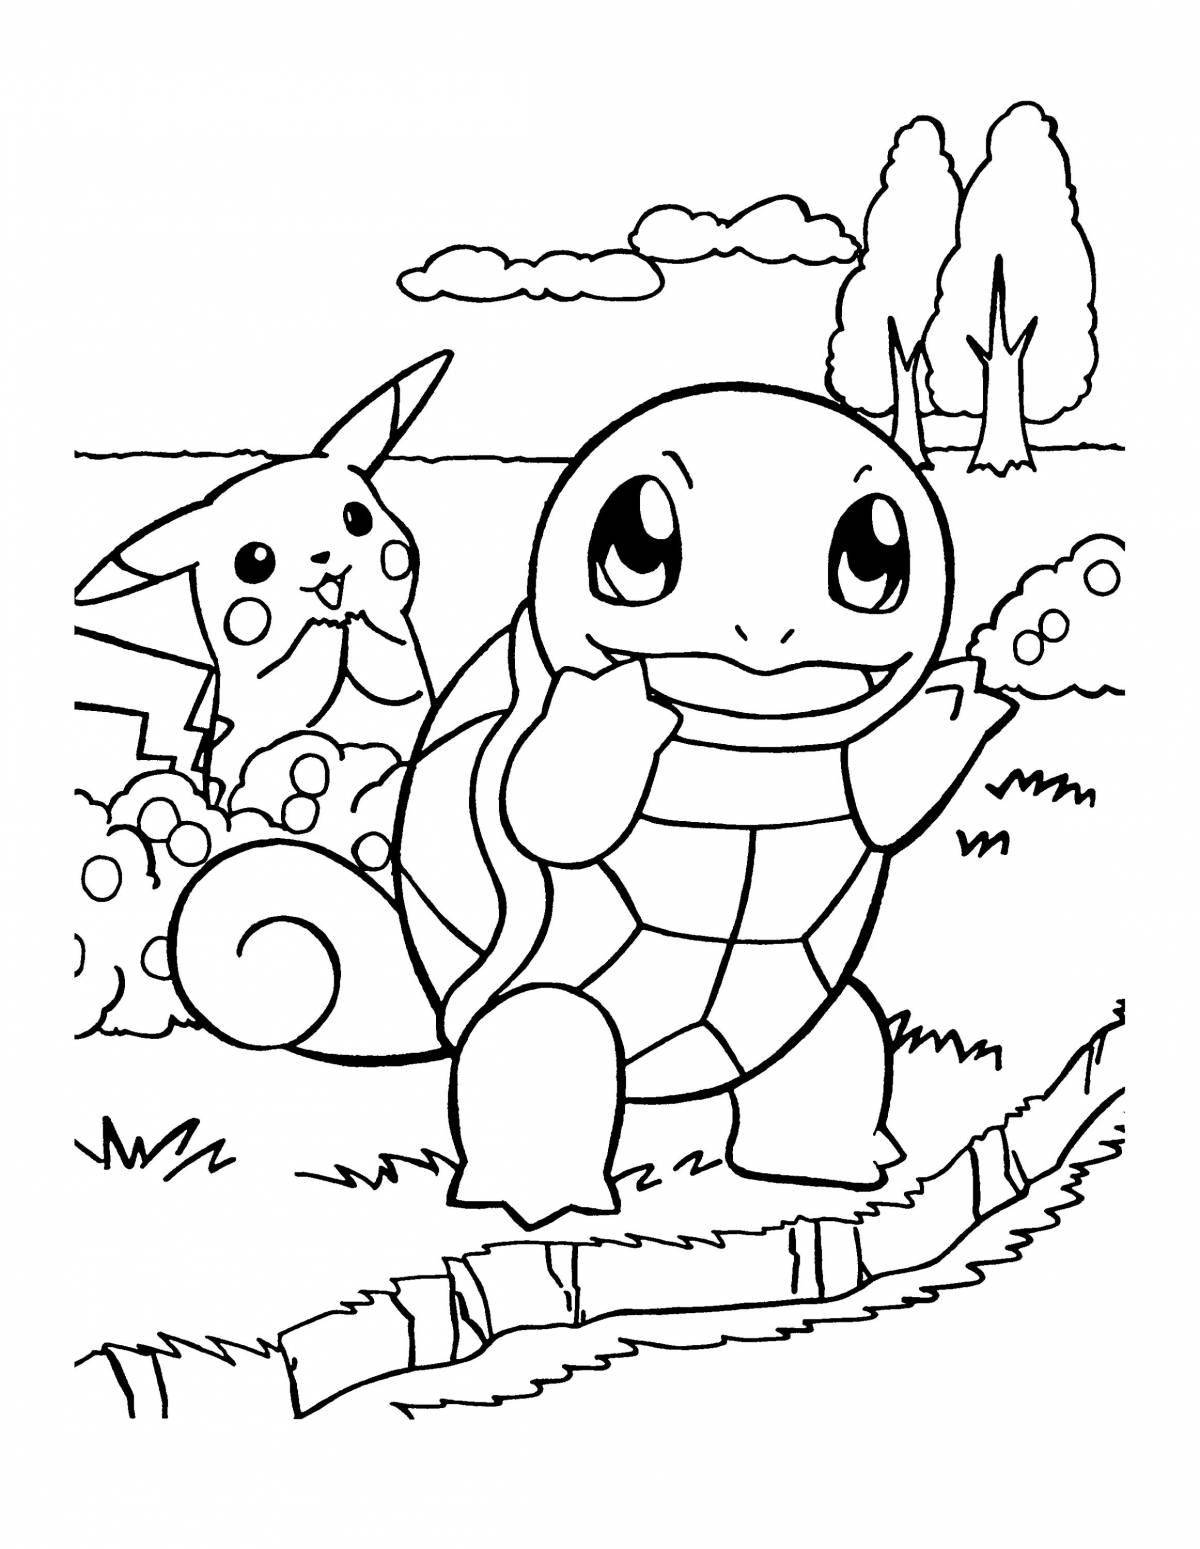 Coloring cute squirtle pokemon